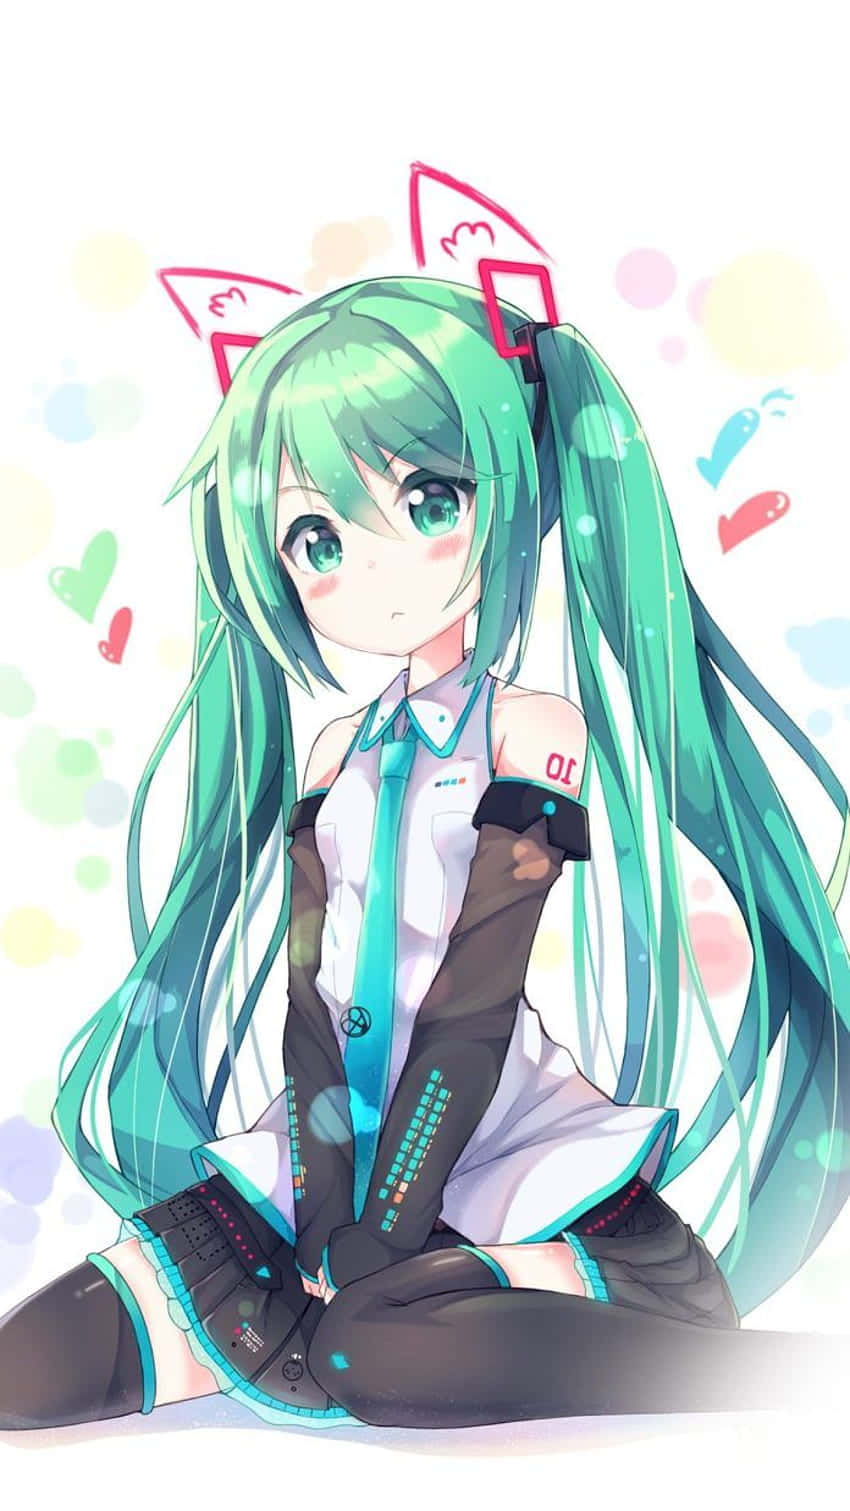 Vocaloid Characters Picture #104093465 | Blingee.com